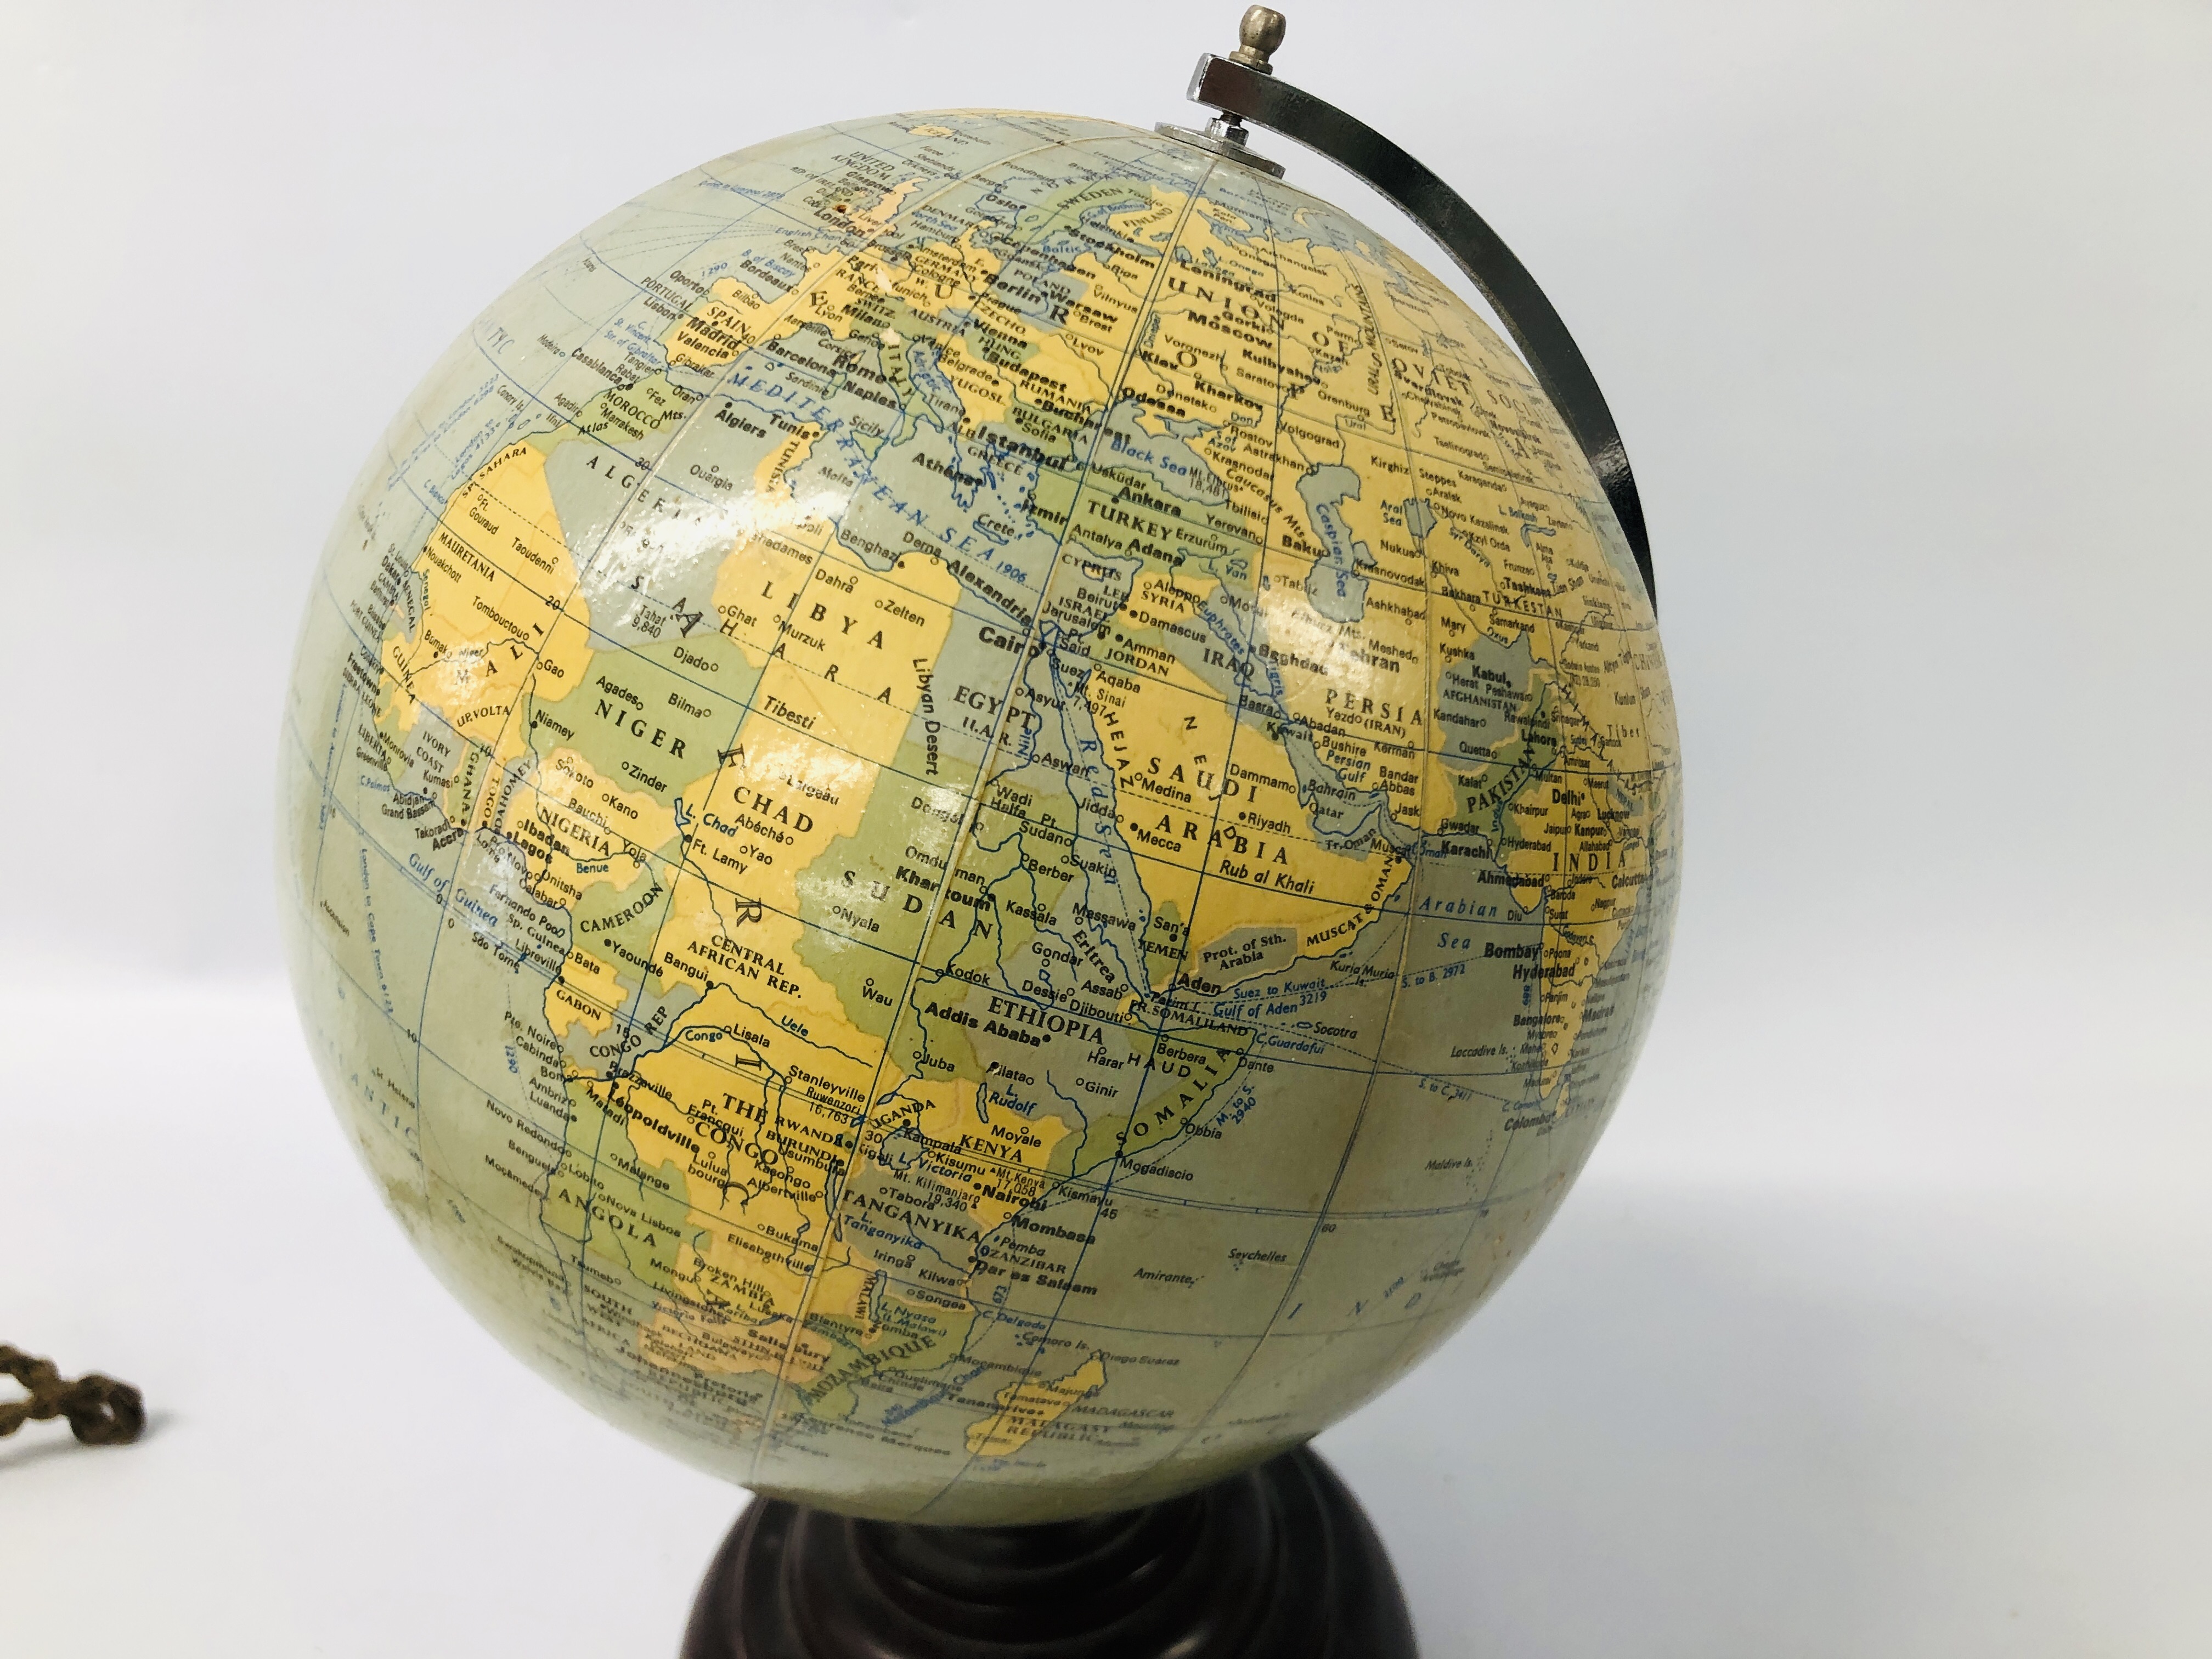 VINTAGE GLOBE GEOGRAPHIA OF FLEET STREET LONDON ALONG WITH A VINTAGE CALL EXCHANGE TELEPHONE - Image 9 of 12